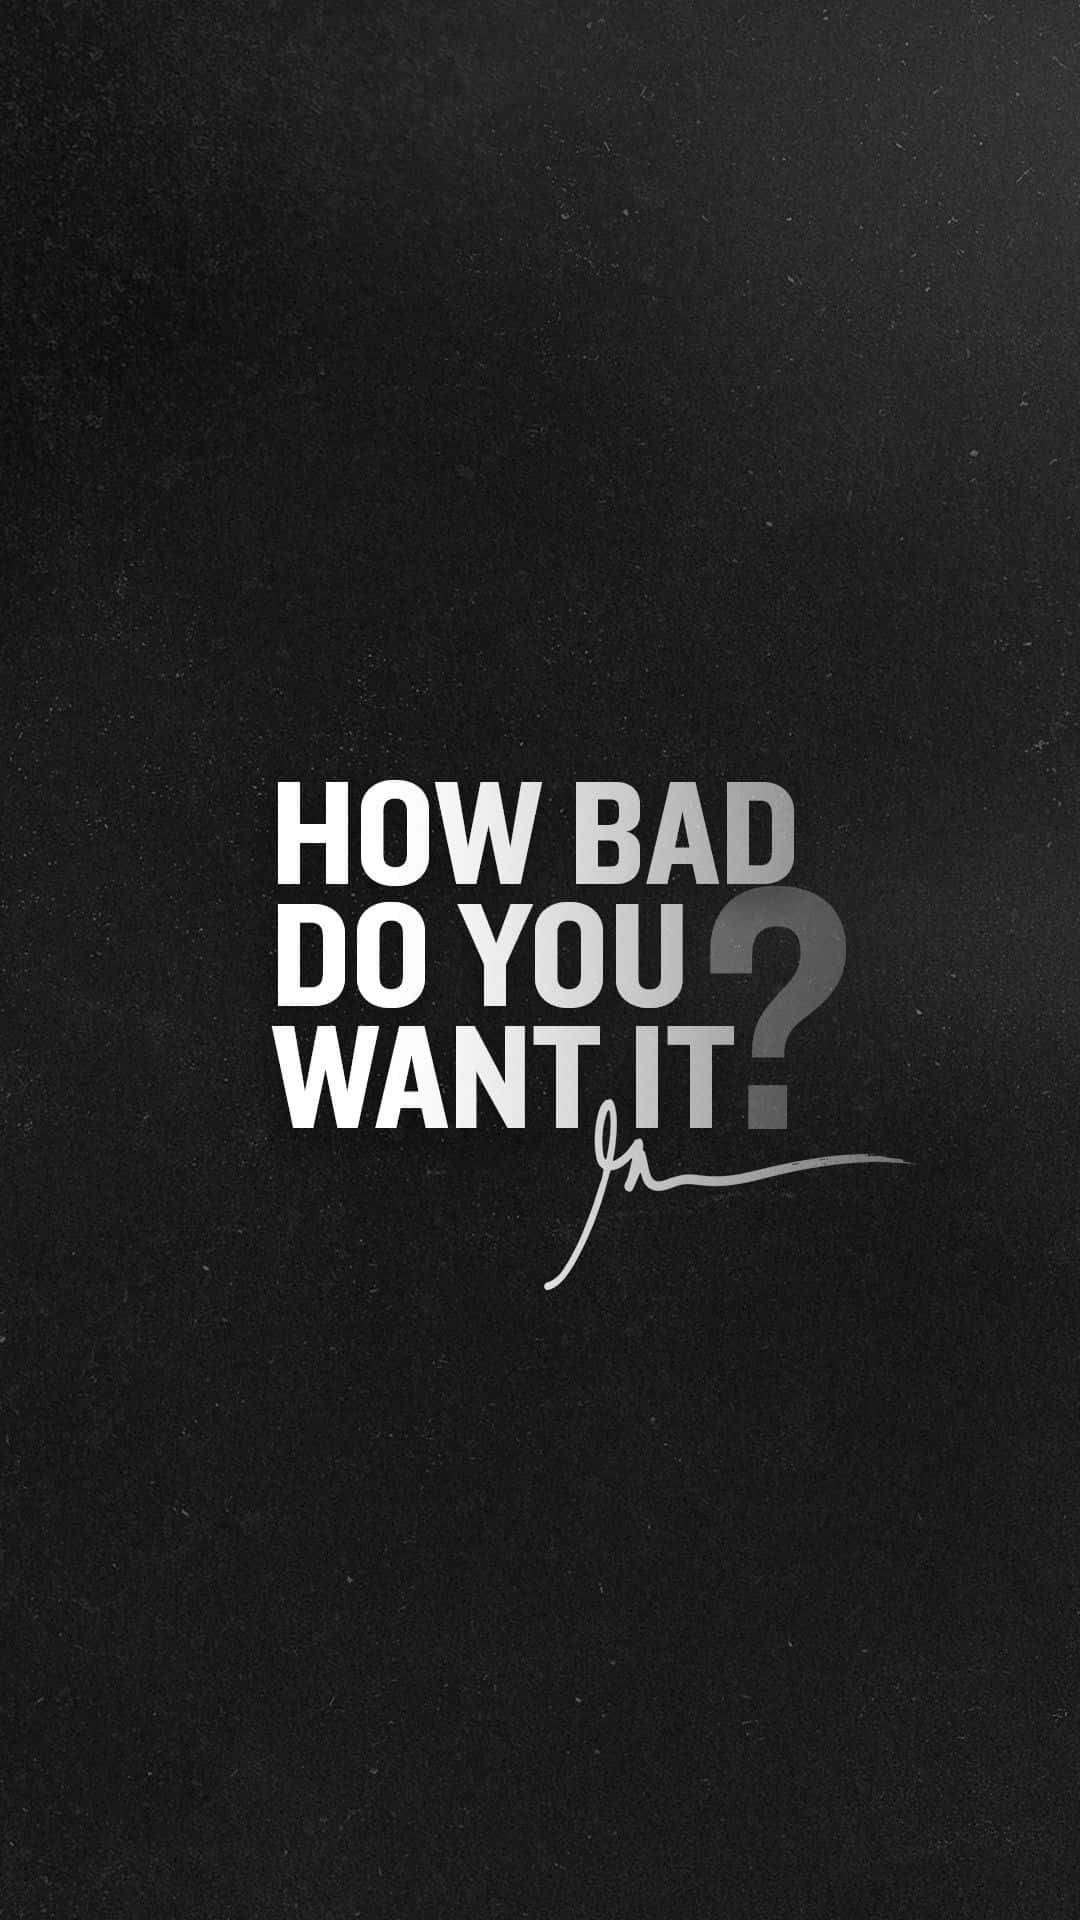 How Bad Do You Want It? Wallpaper